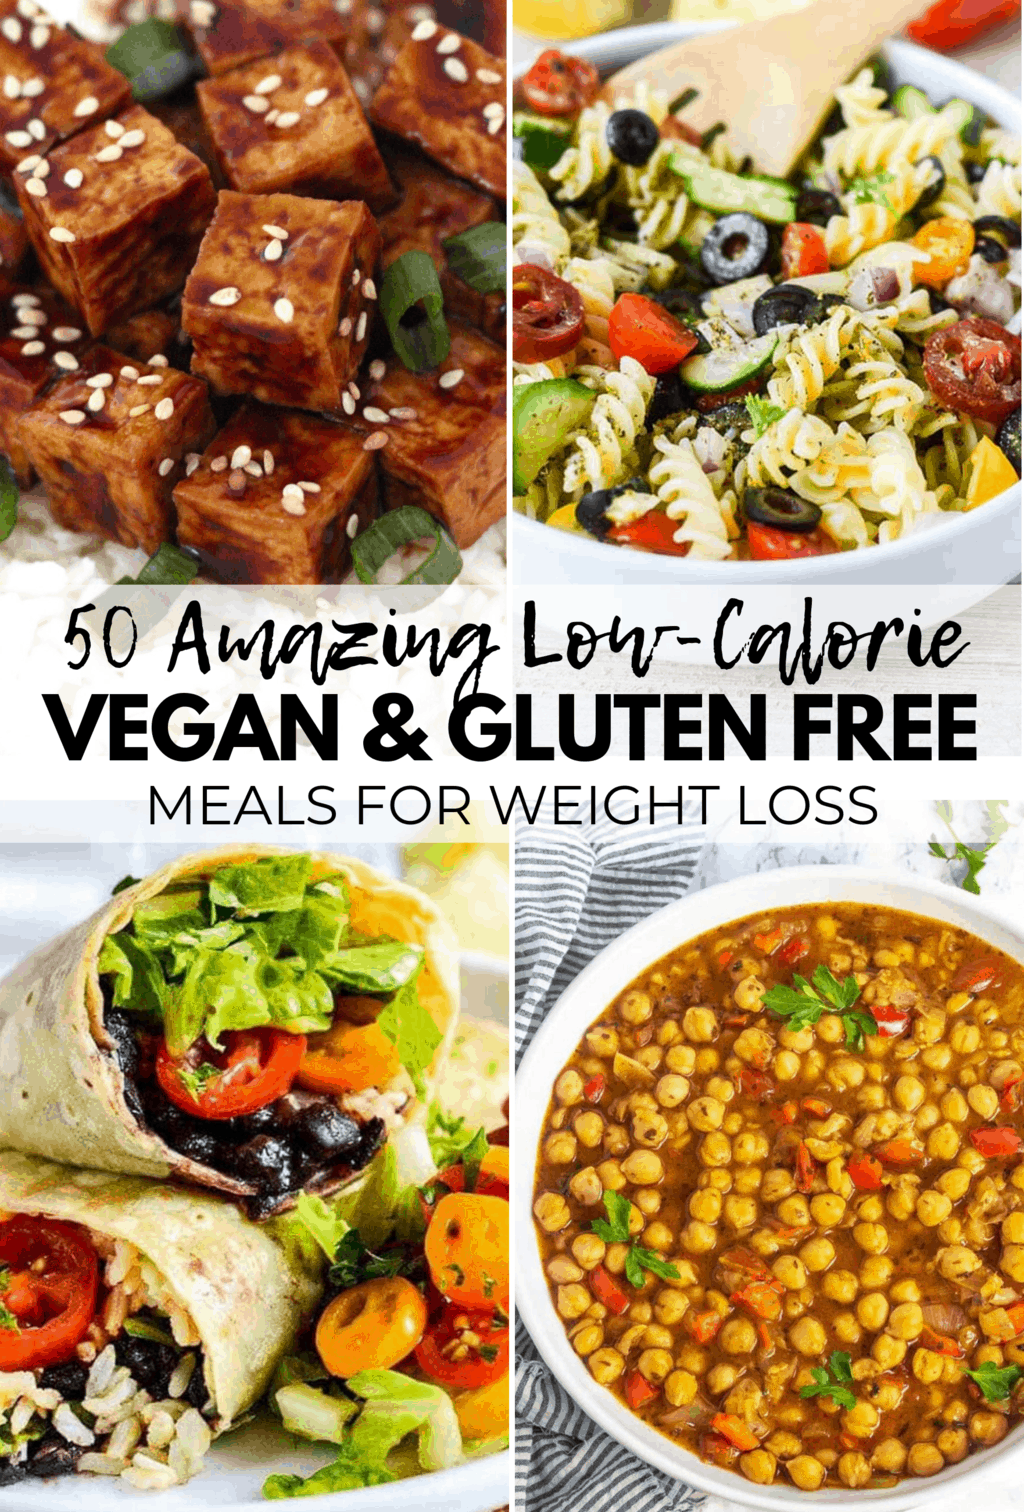 Here is a DELICIOUS collection of 50 AMAZING Vegan Meals for Weight Loss! All recipes are gluten-free & low-calorie - under 350 calories each! These recipes will help you lose weight in a delicious, healthy & satisfying way.